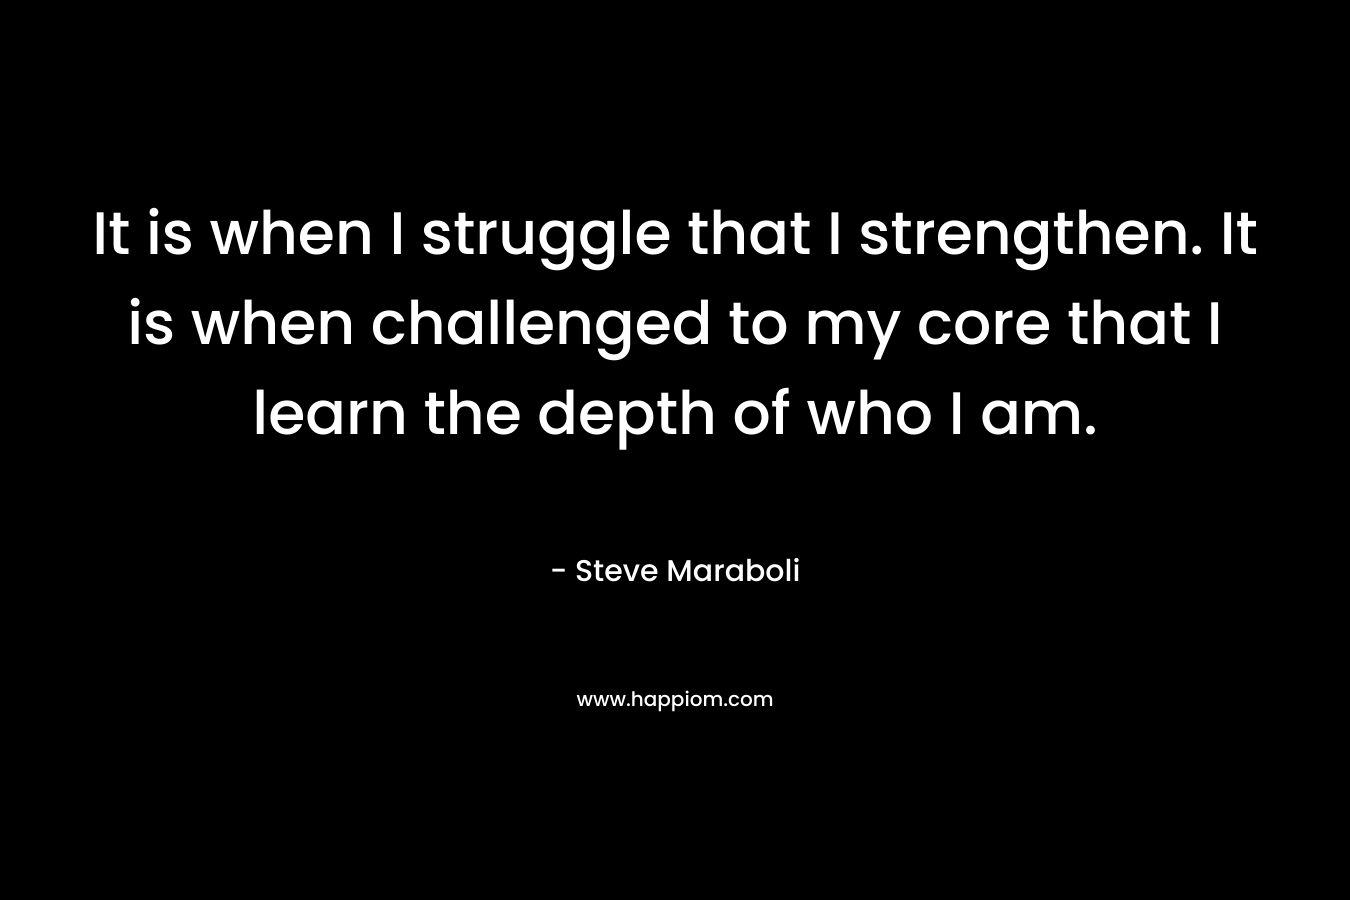 It is when I struggle that I strengthen. It is when challenged to my core that I learn the depth of who I am.